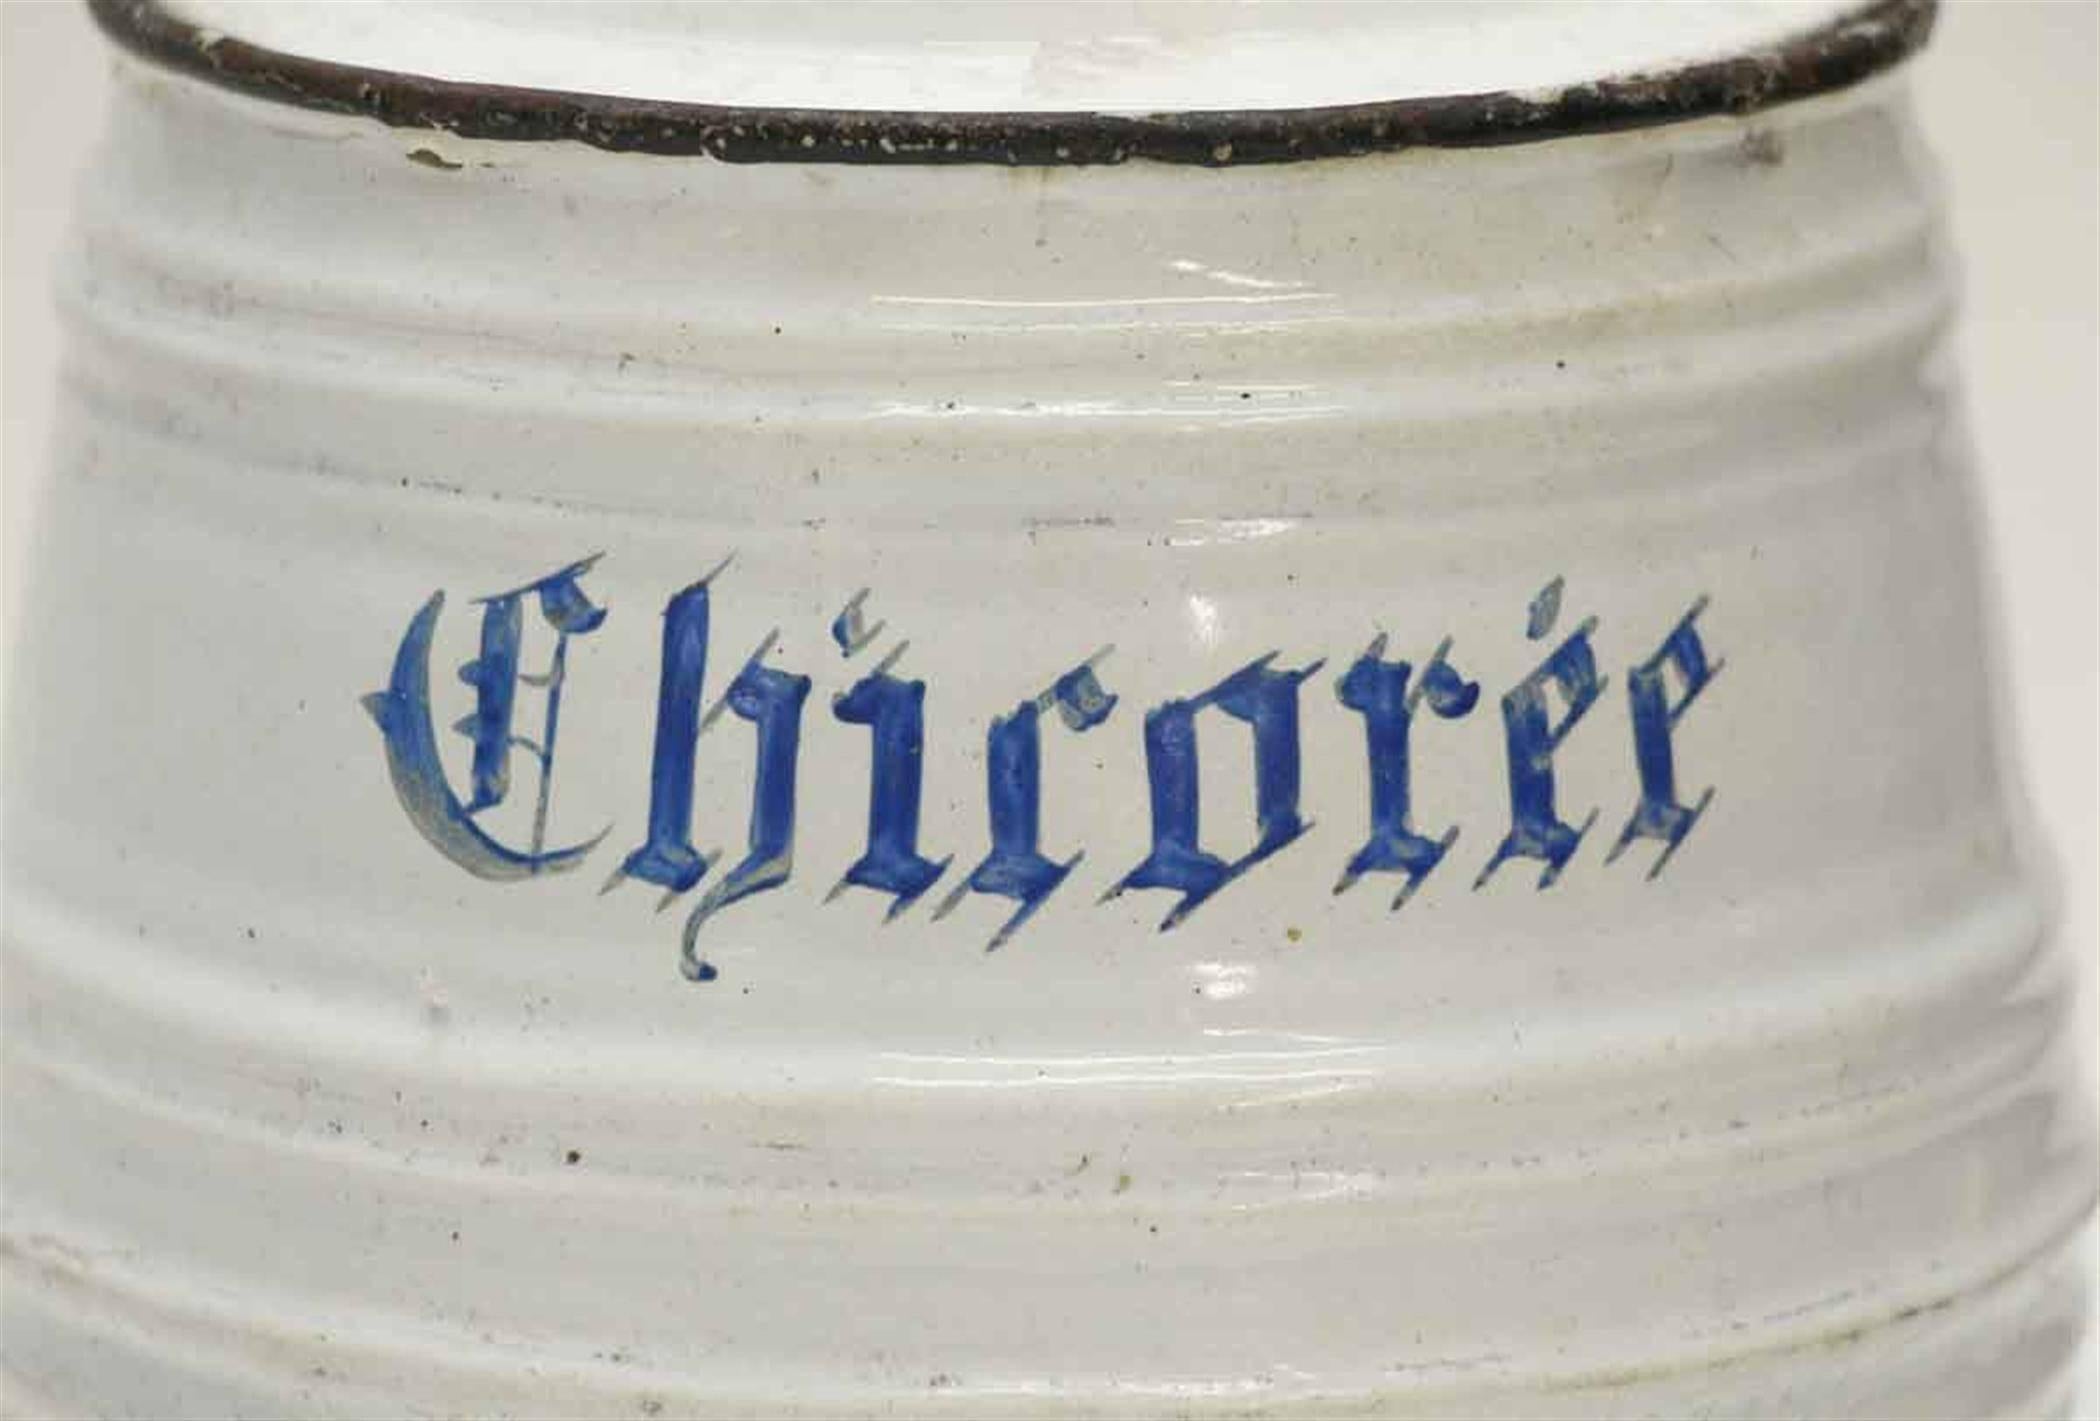 1950s white metal French pot for chicoree in blue lettering. There is some wear from age and use. Chircoree (French) or chicory (English) is added to the coffee to soften the bitter edge of the dark roasted coffee giving it an almost chocolate